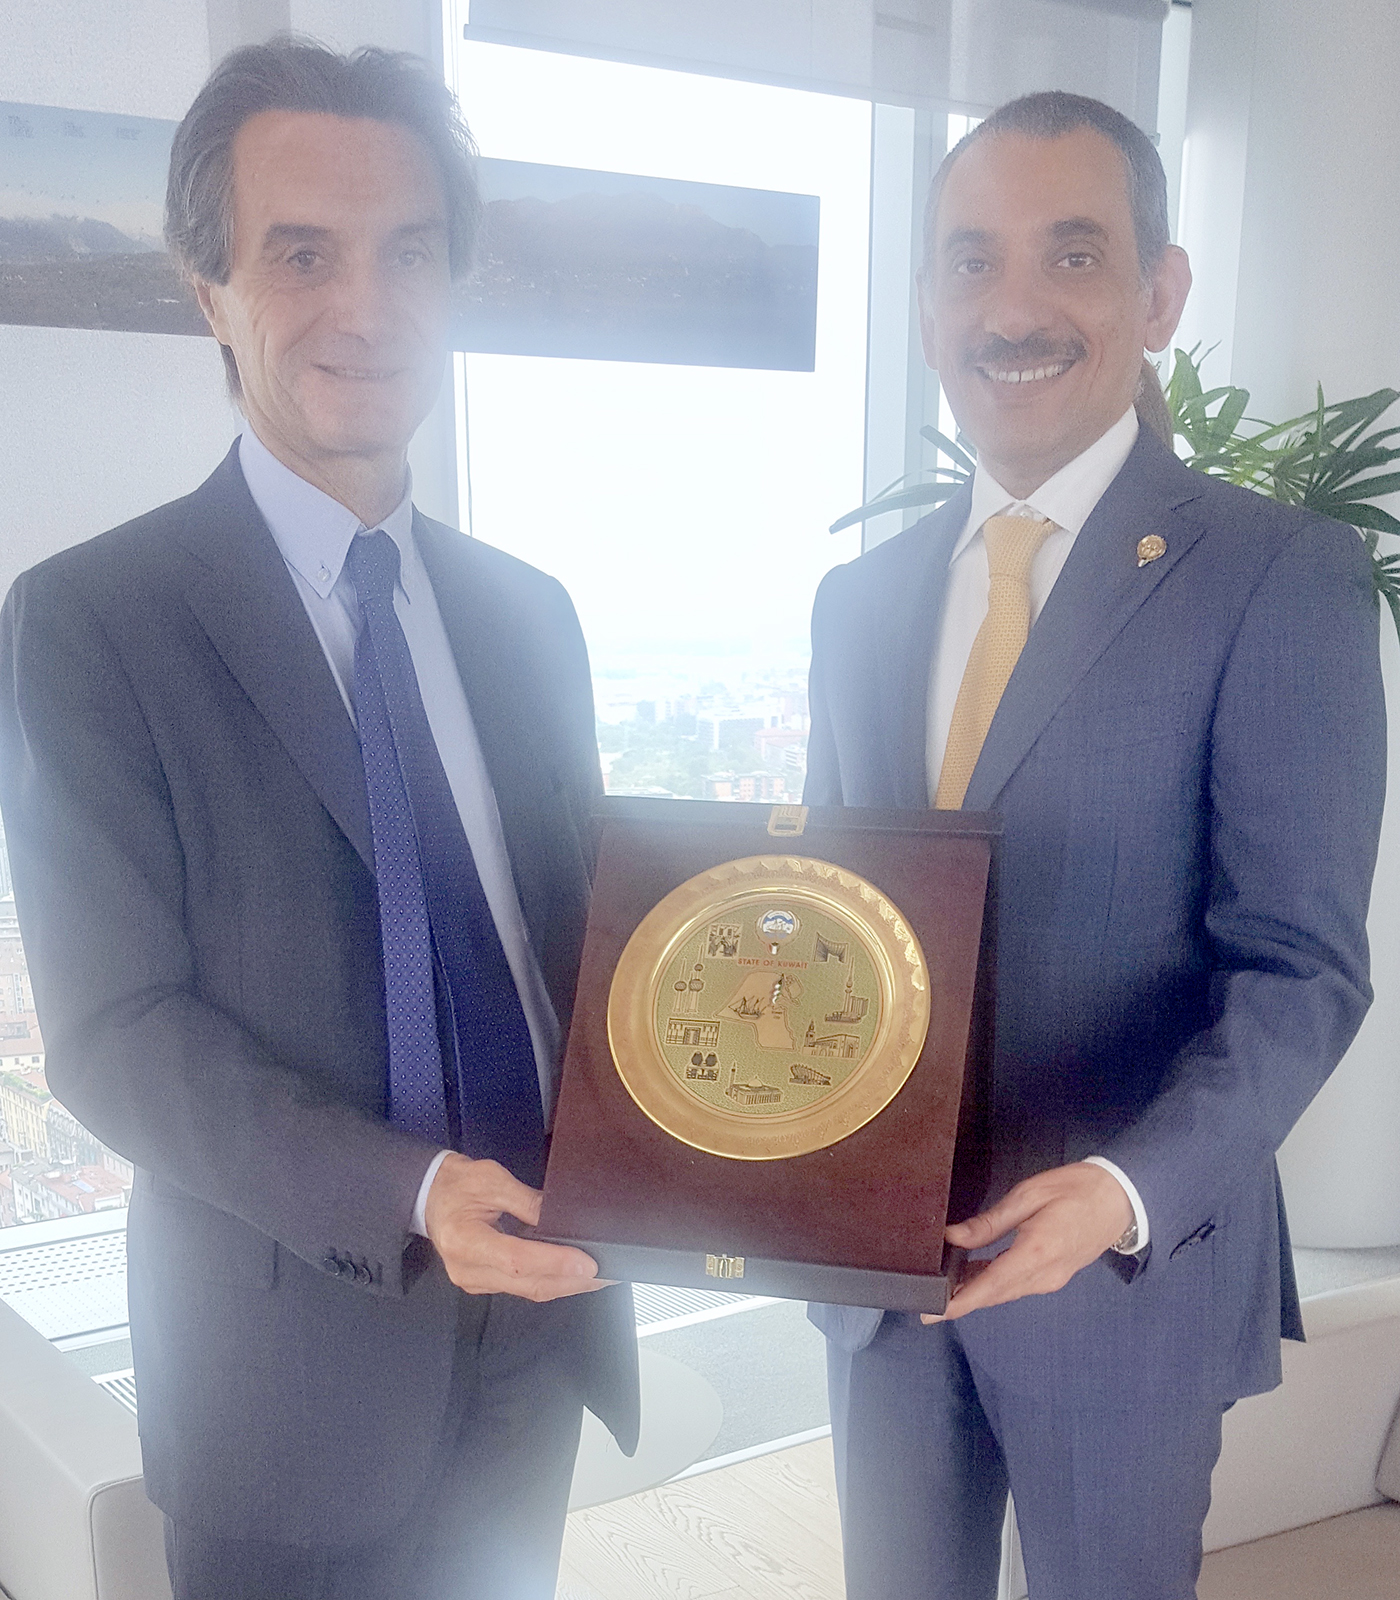 The Consul General of the State of Kuwait in Milan and Northern Italy Abdulnaser Bokhador with President of Lombardy Attilio Fontana